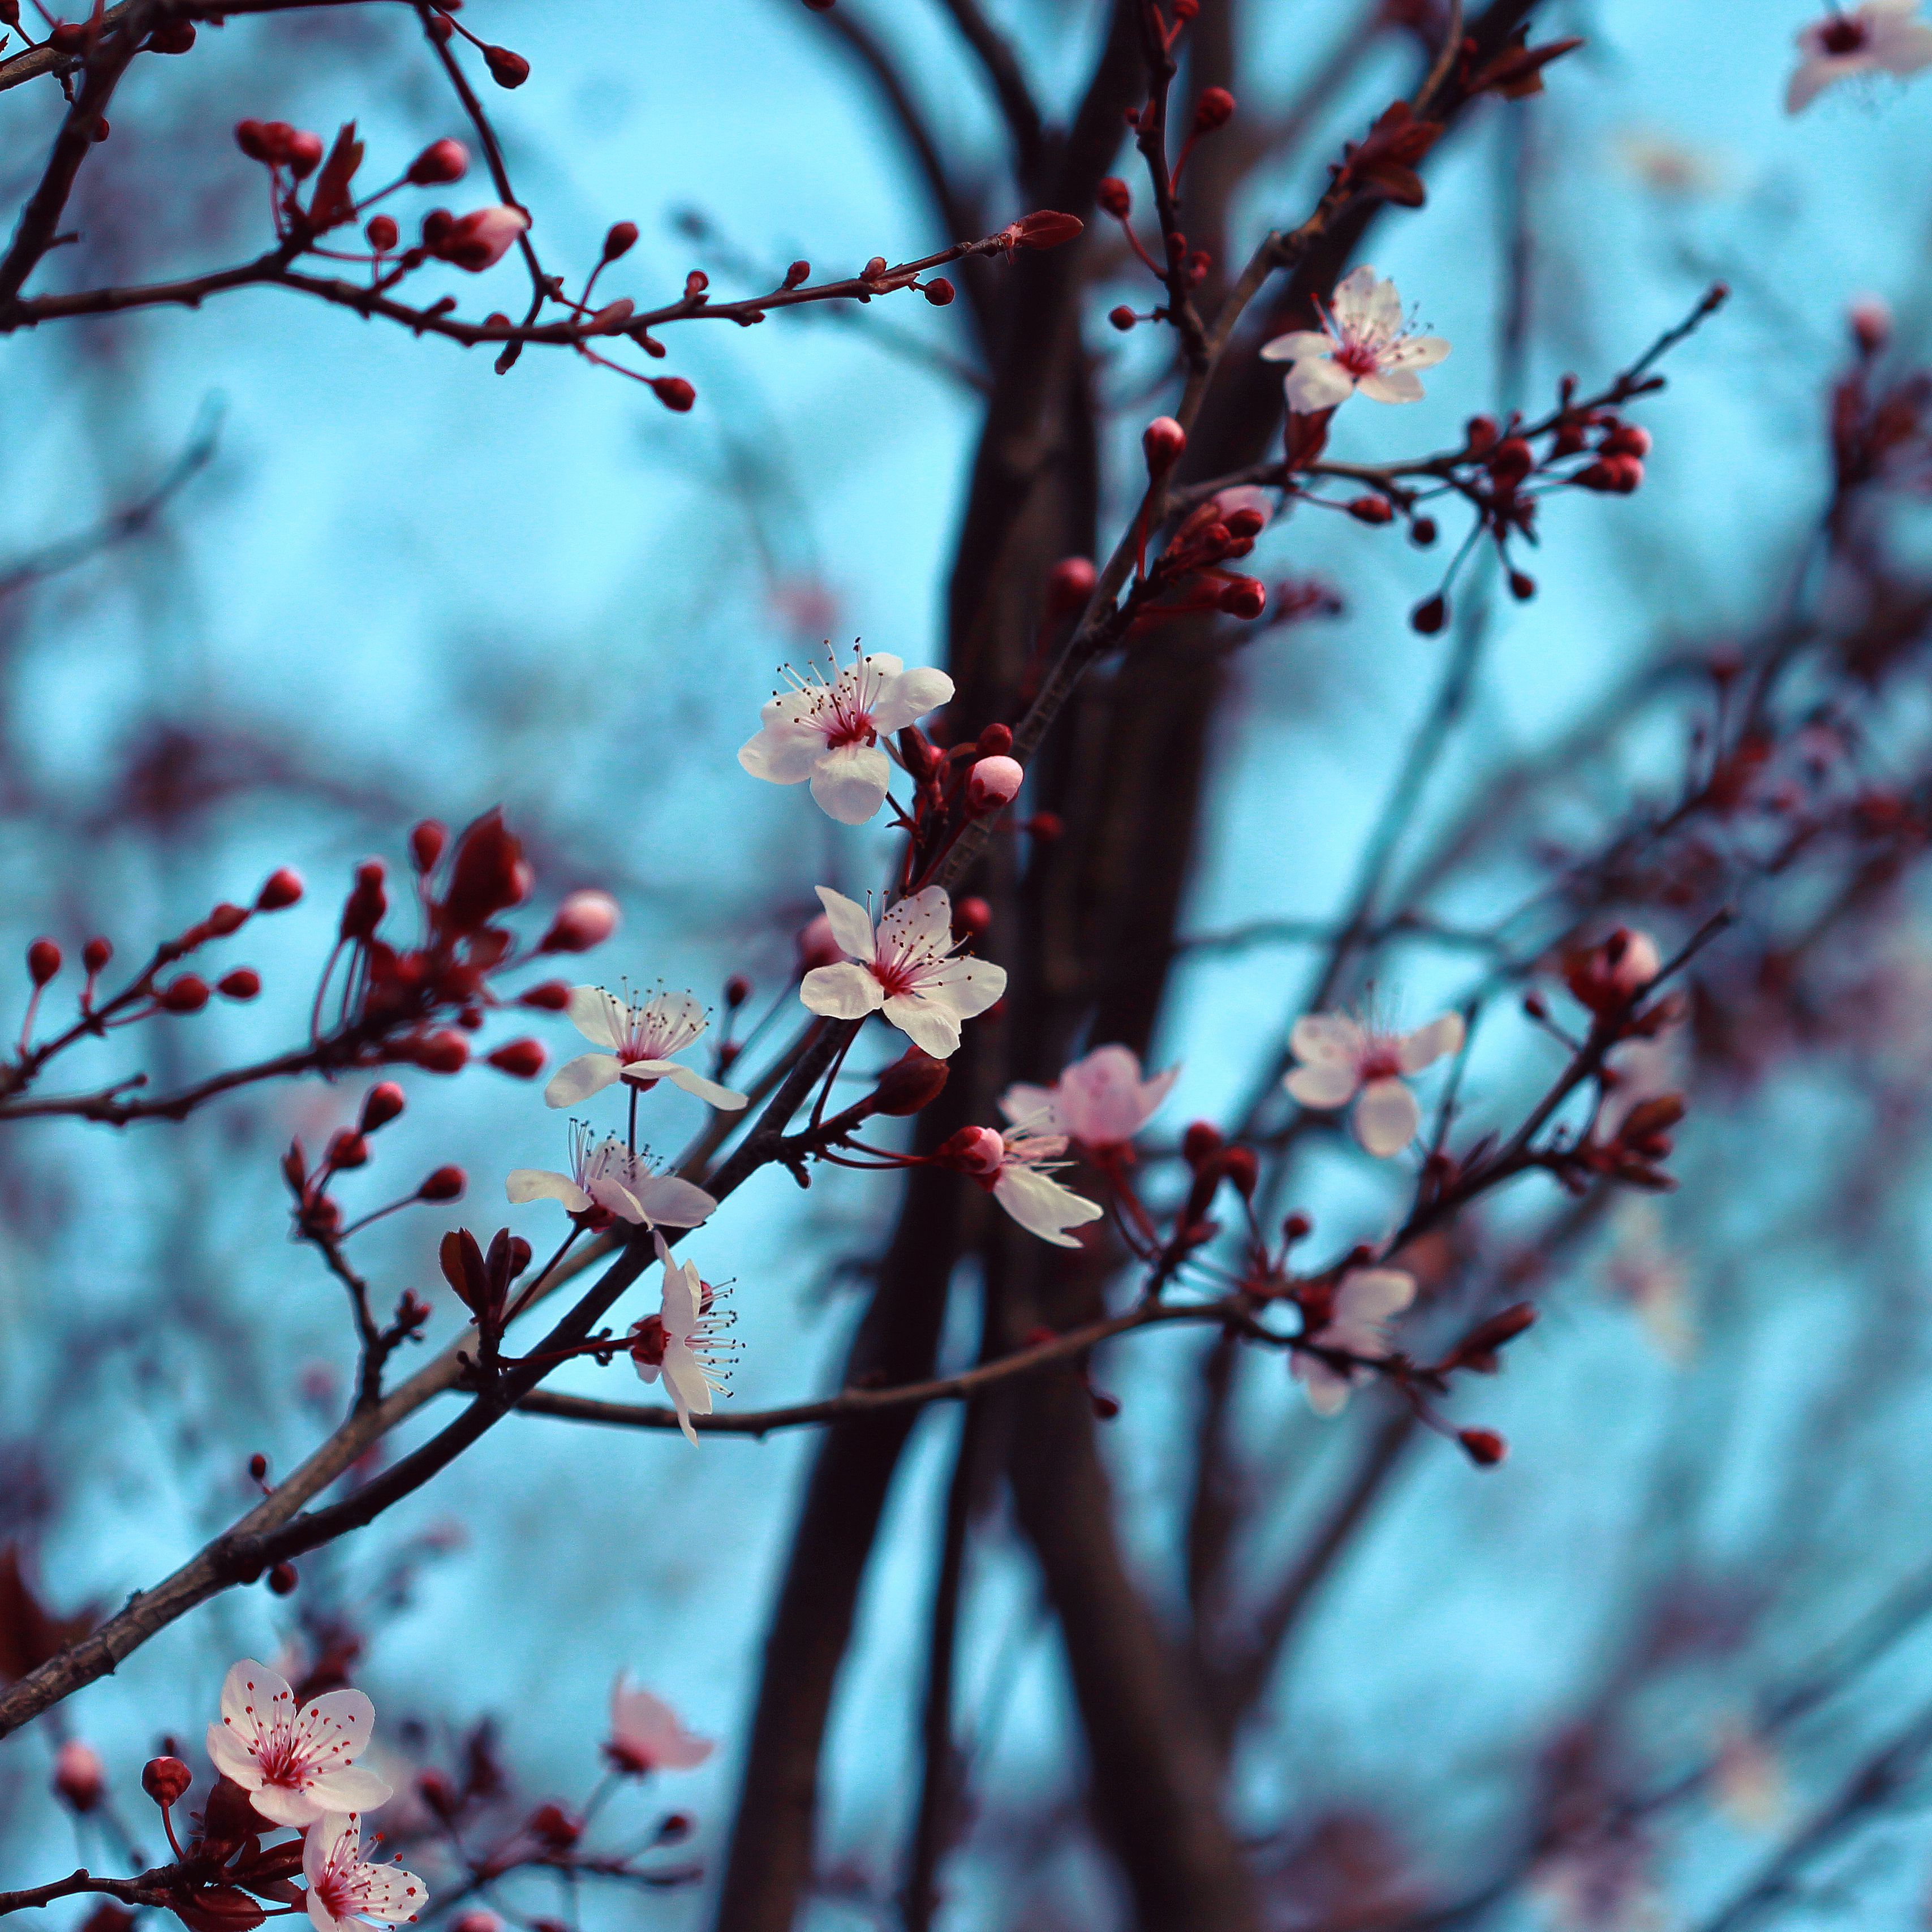 Download wallpaper 3415x3415 cherry, bloom, spring, branches